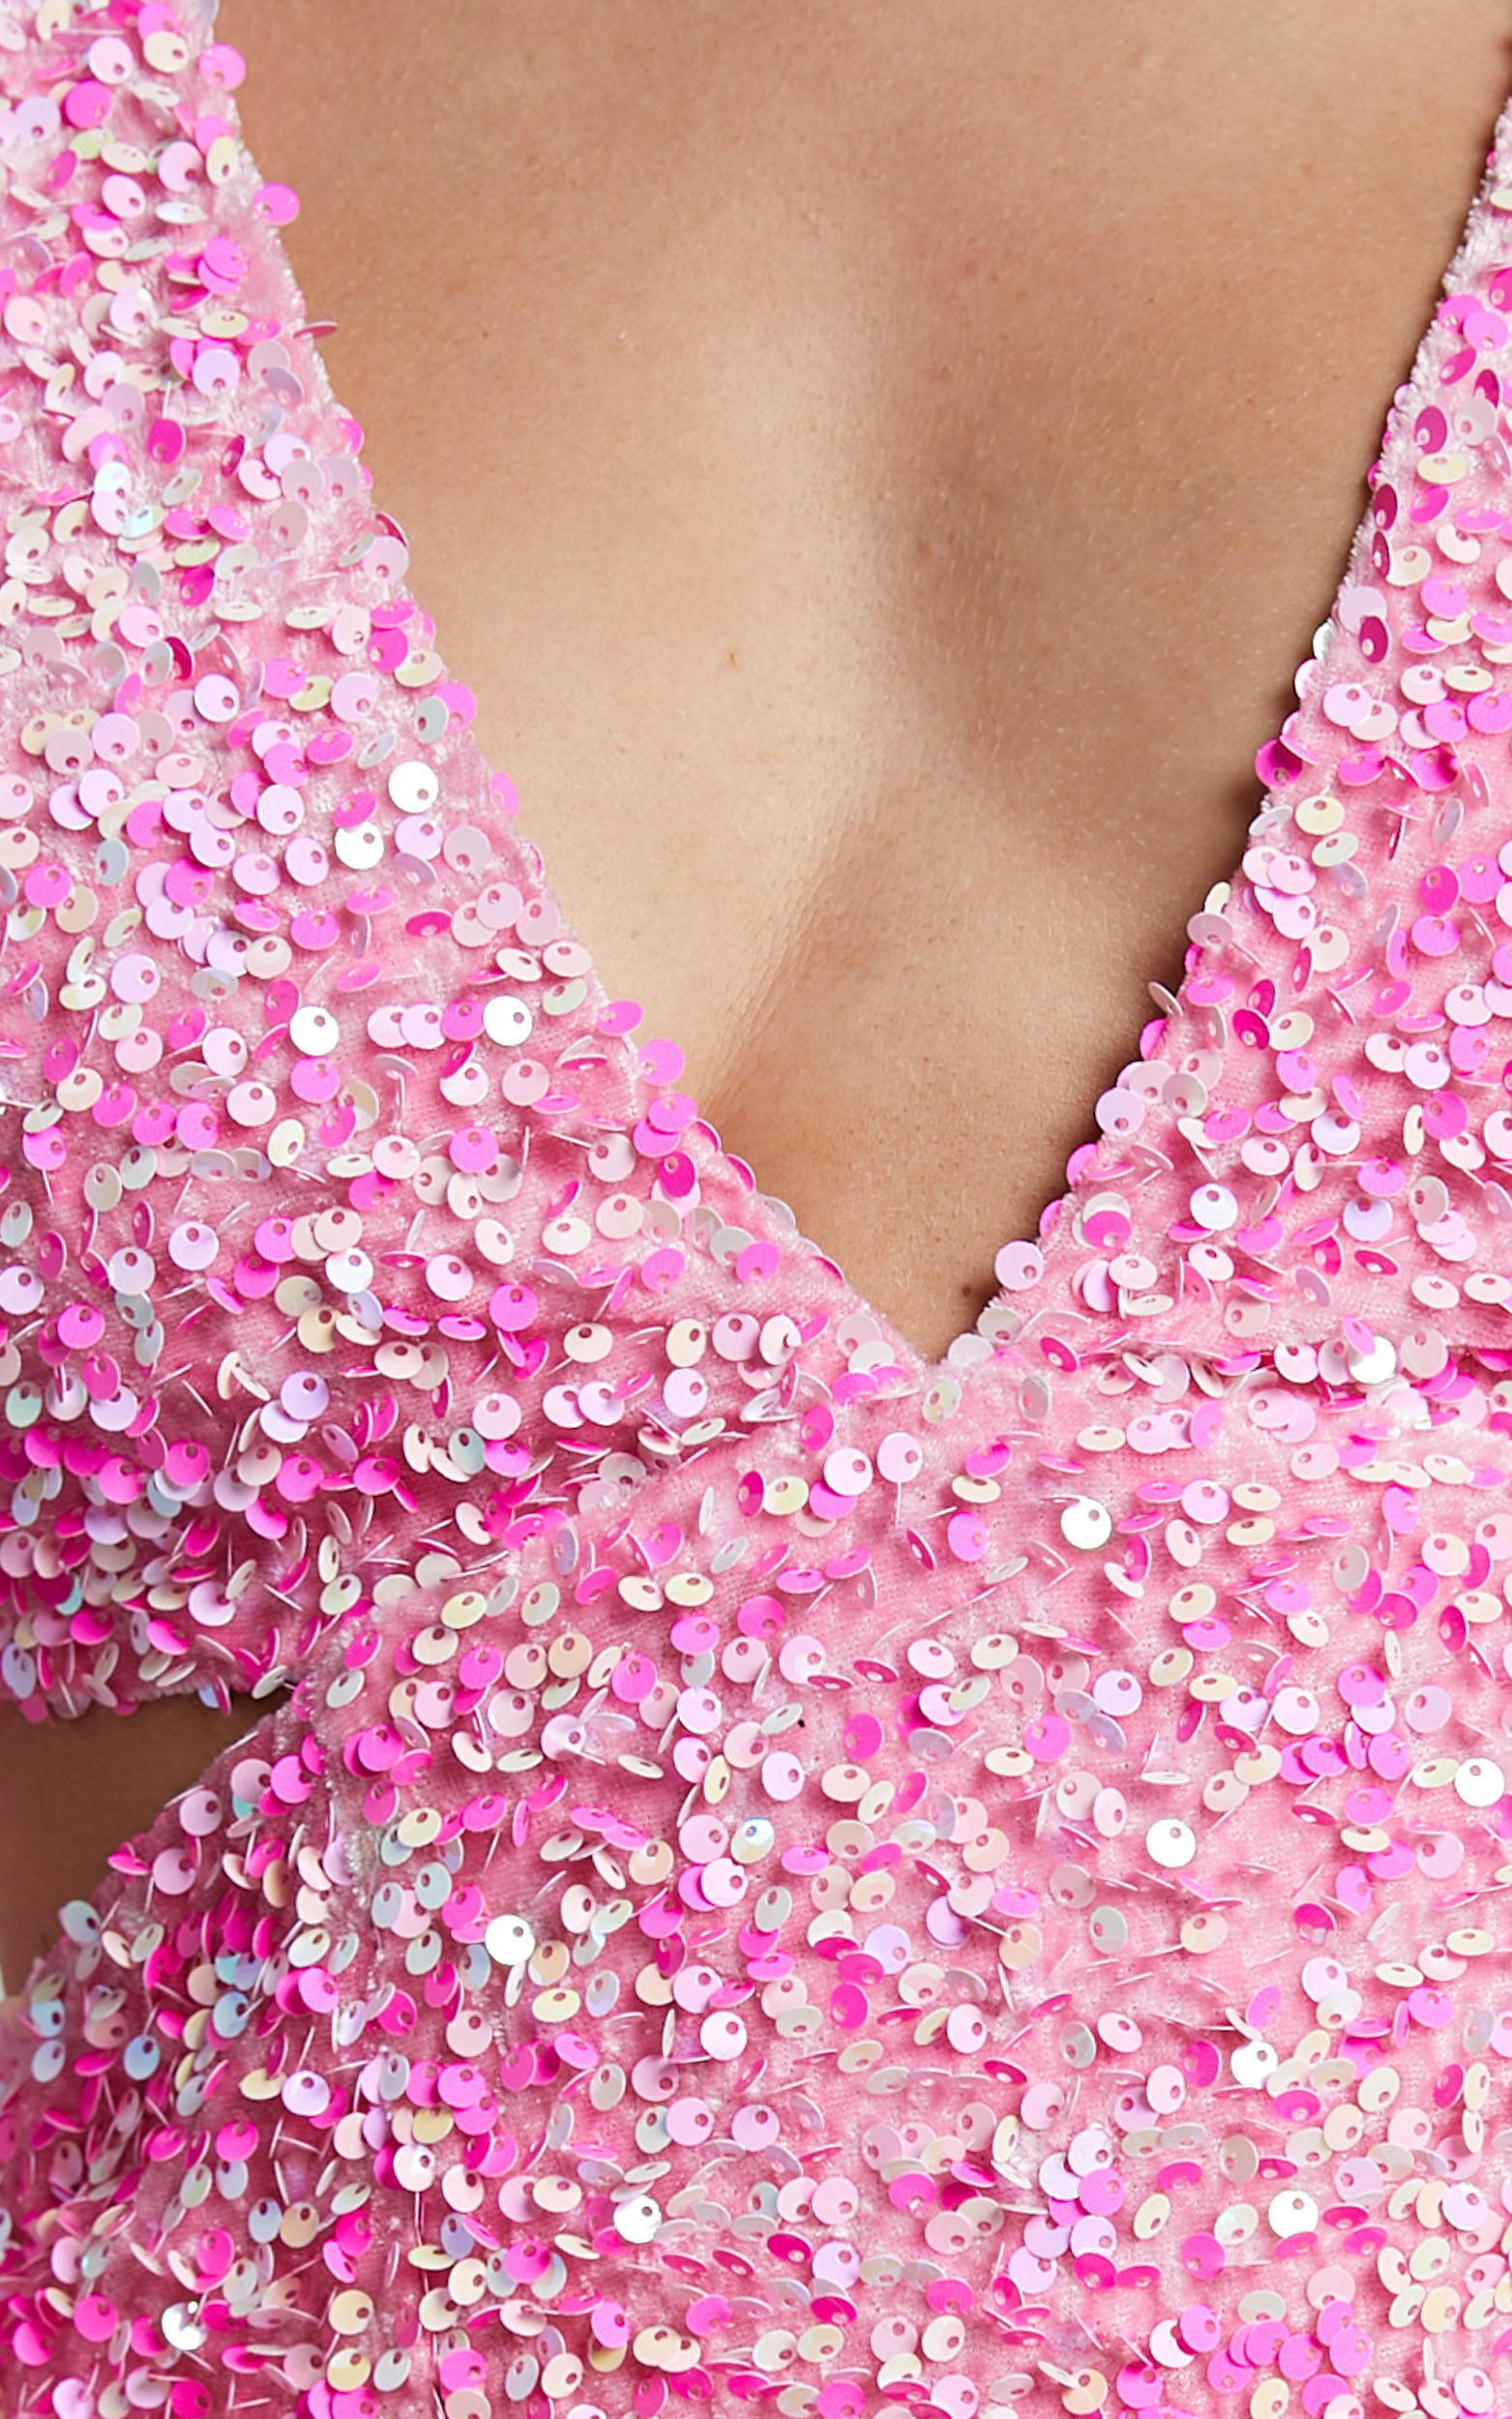 Gabriella Mini Dress - Plunge Long Sleeve Cut Out Sequin Dress in Pink Sequin - Cocktail Dresses